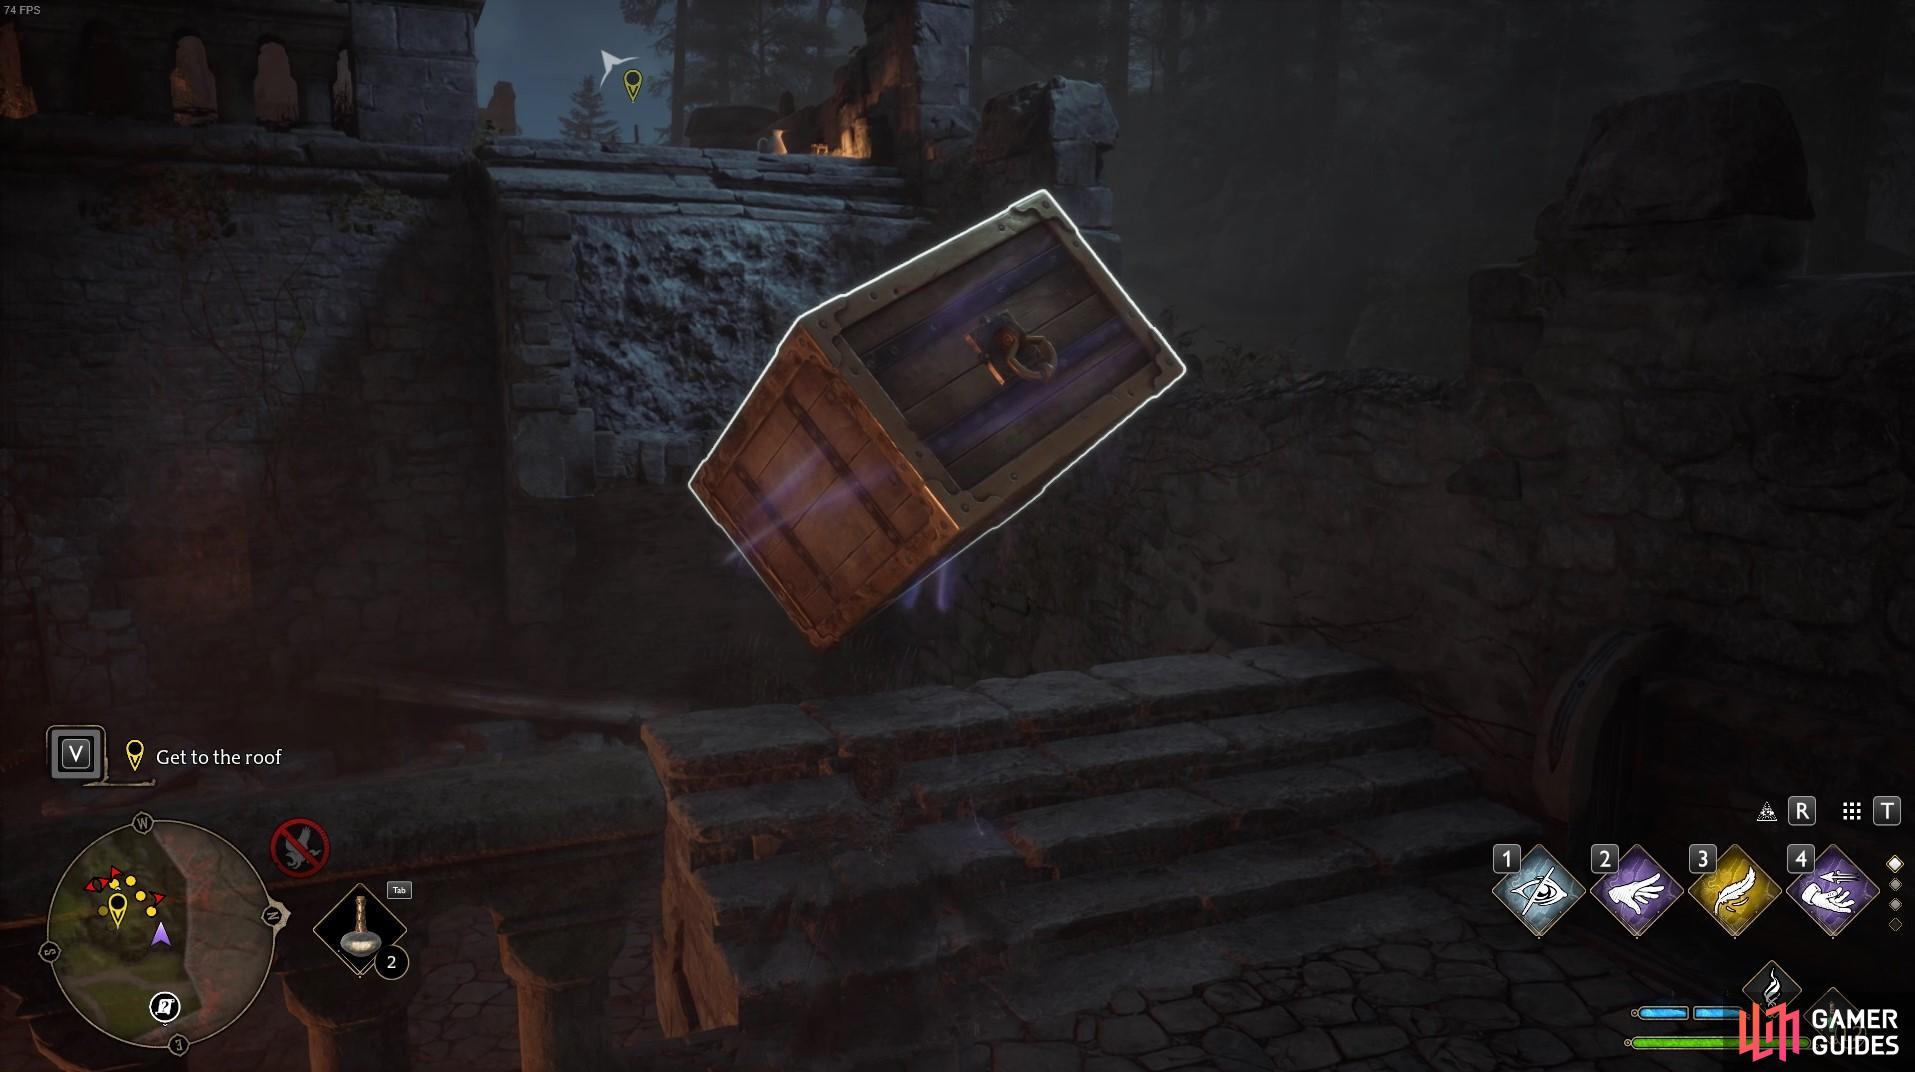 Once again, levitate another box and use that as a platform in the High Keep mission.